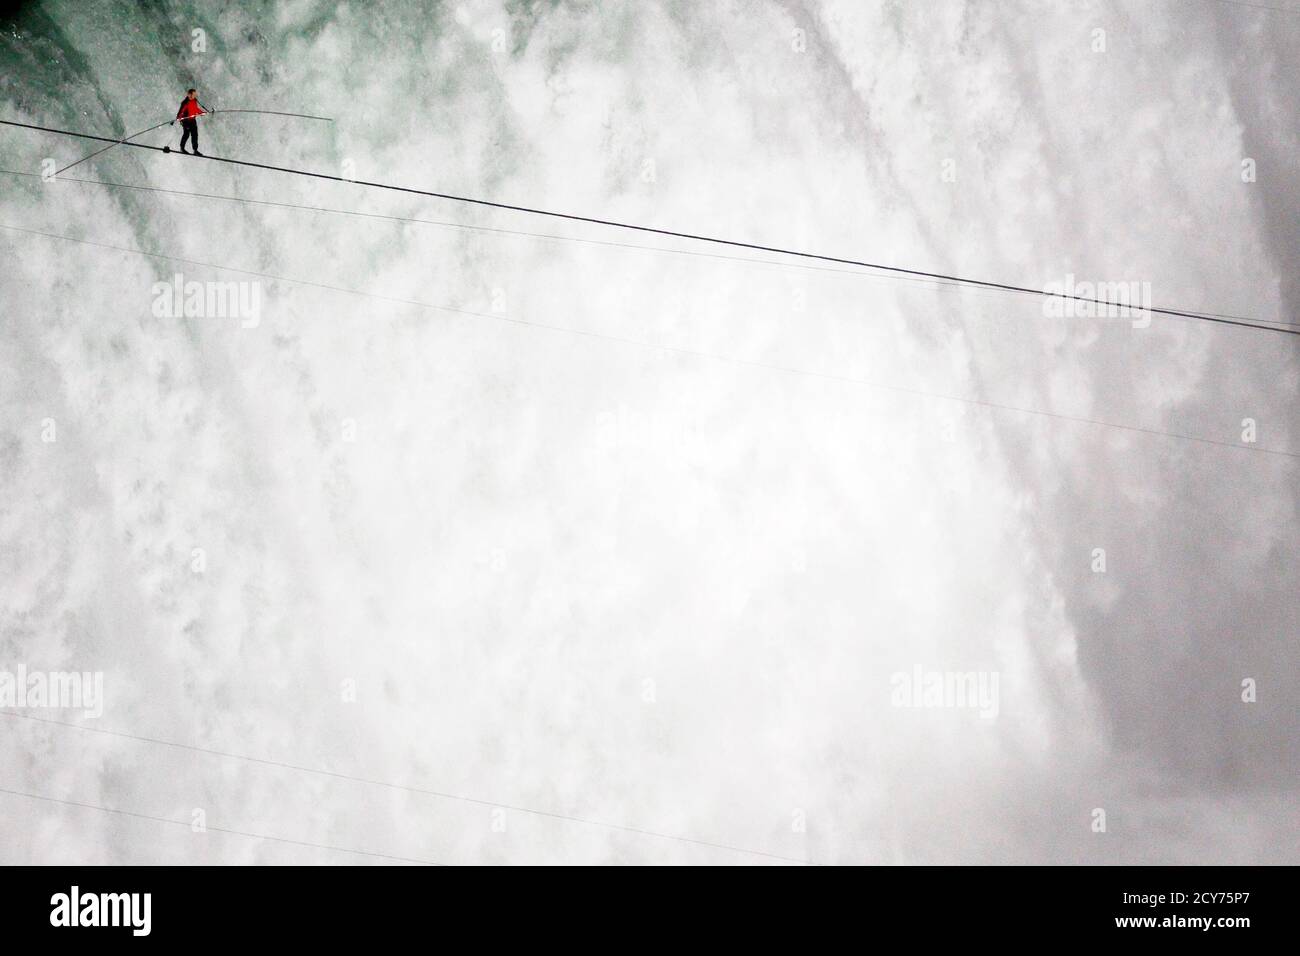 Tightrope walker Nik Wallenda walks the high wire from the U.S. side to the  Canadian side